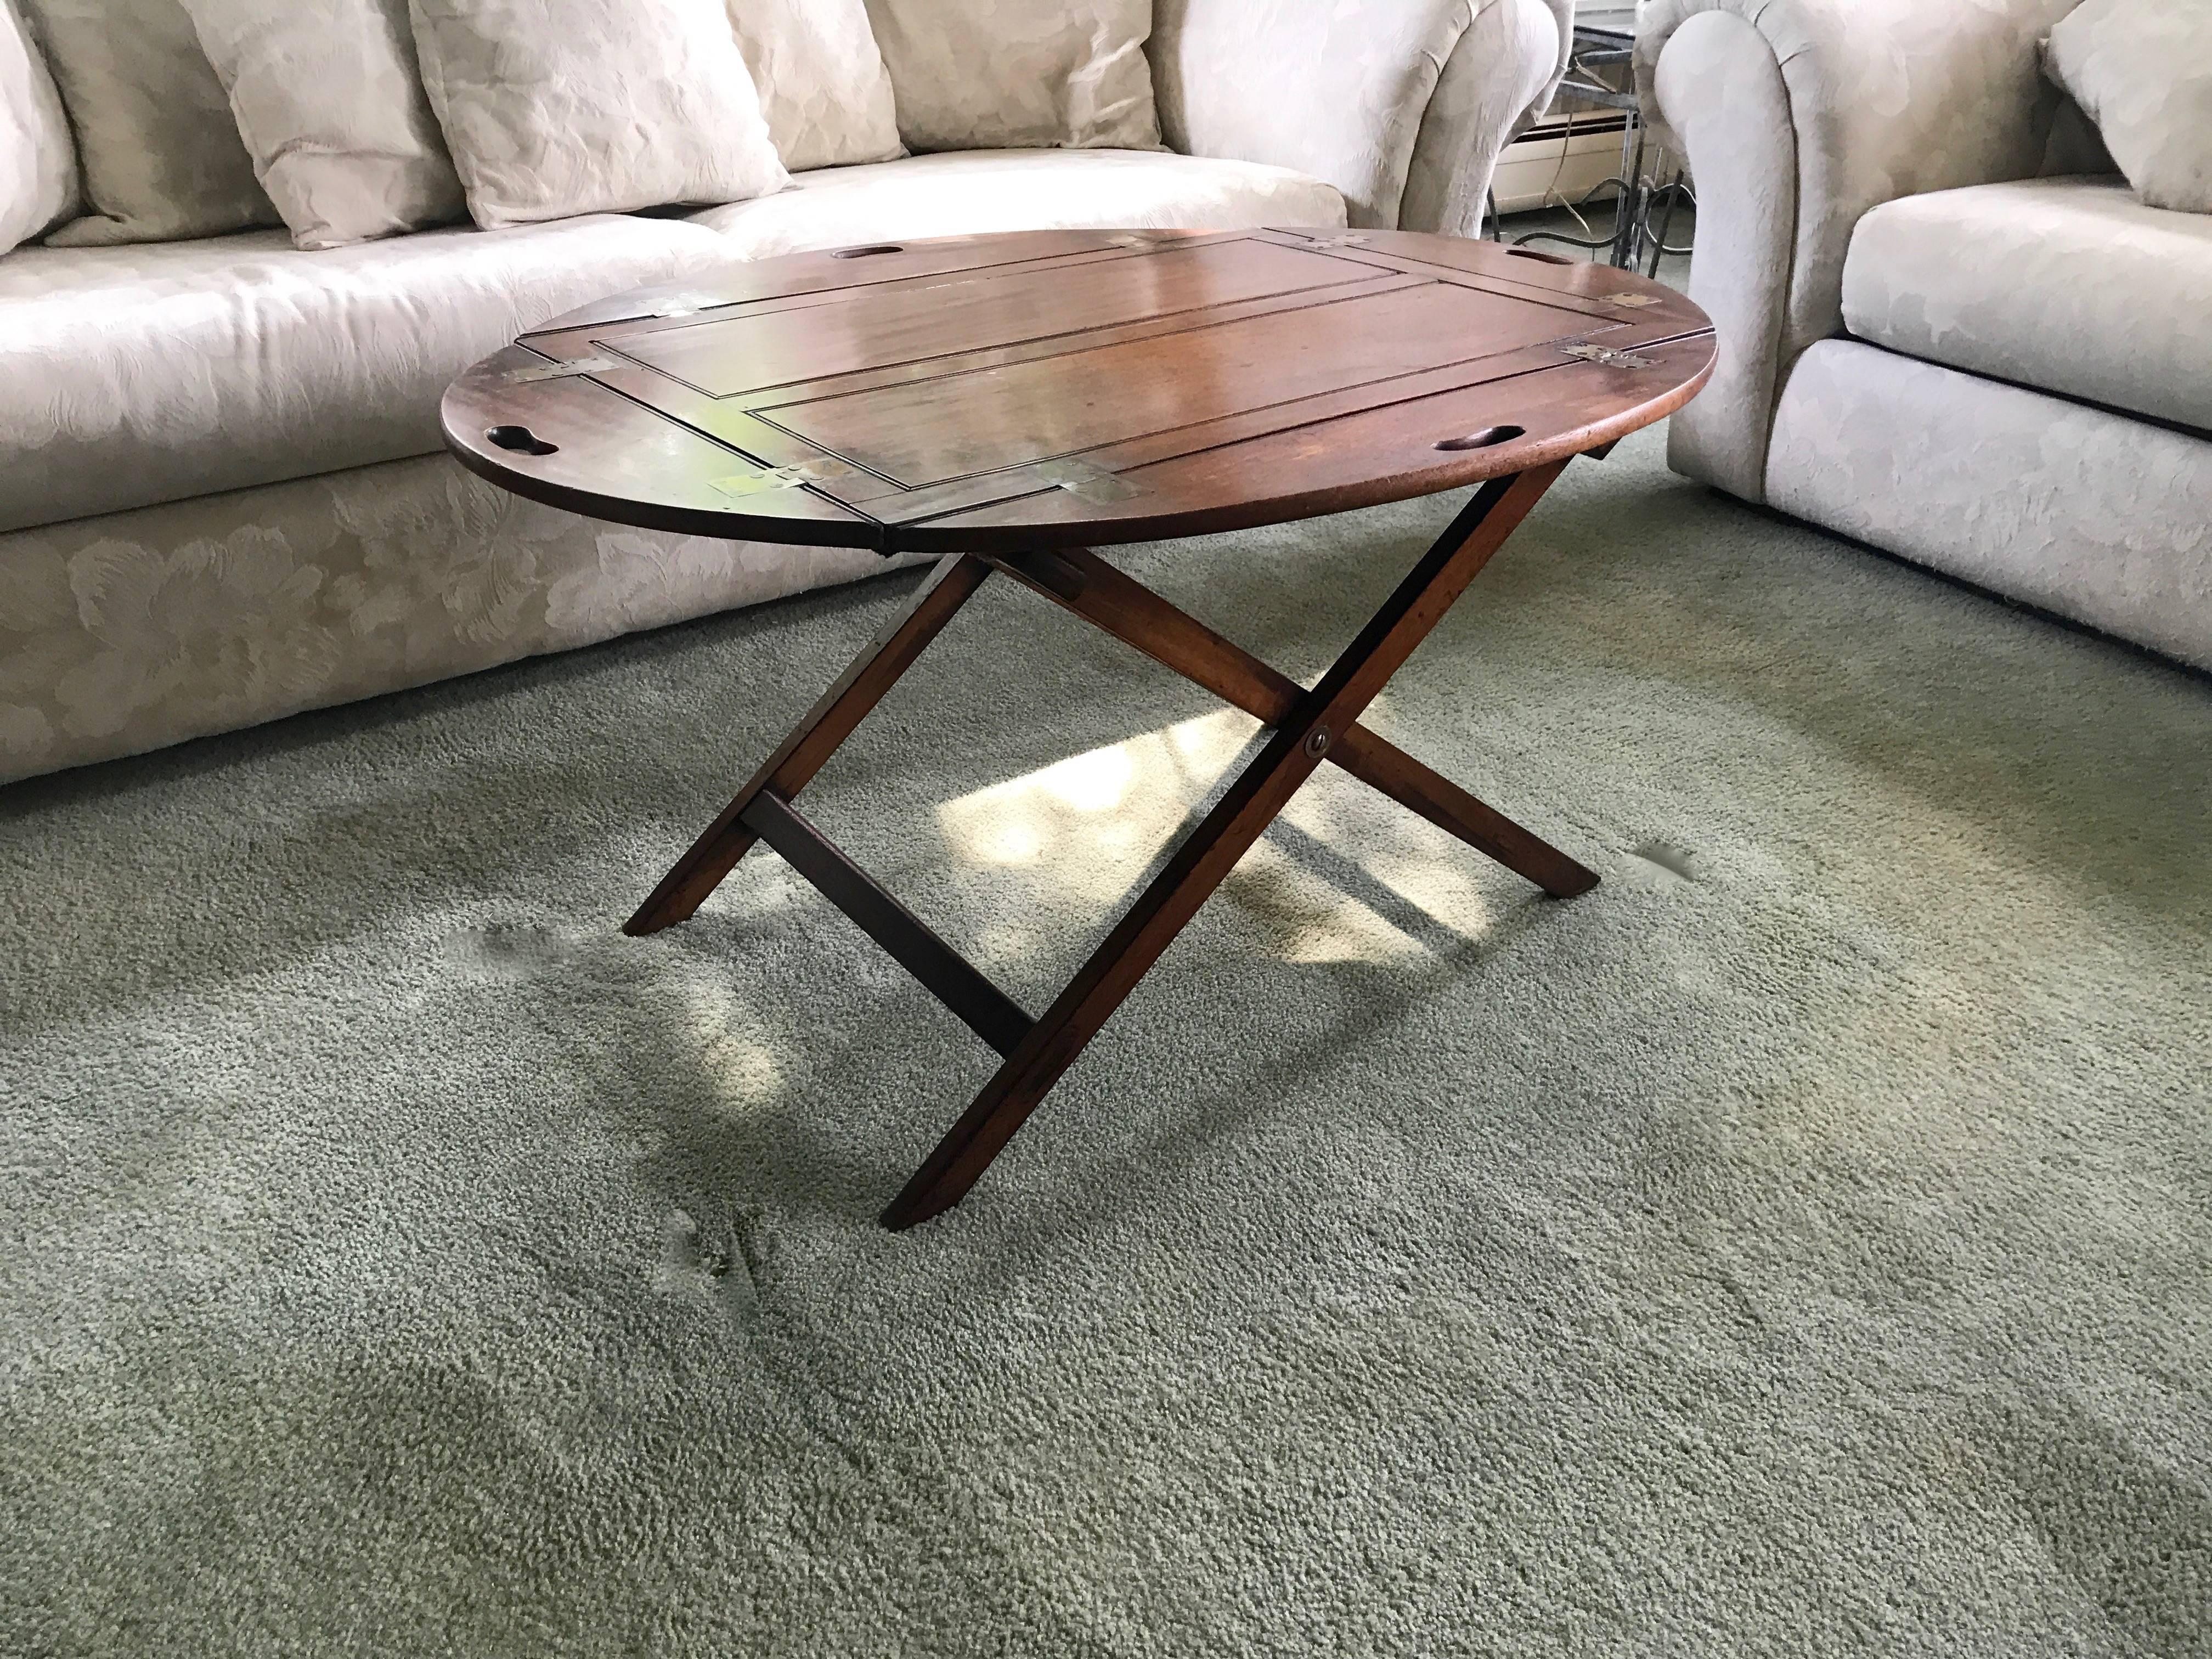 George III mahogany Butler’s tray, circa 1780. With original stand, brass hinges. Substitute the mundane coffee table and entertain your guests in style. This piece will be the talk of the room for certain! Felt was carefully added to the bottom to